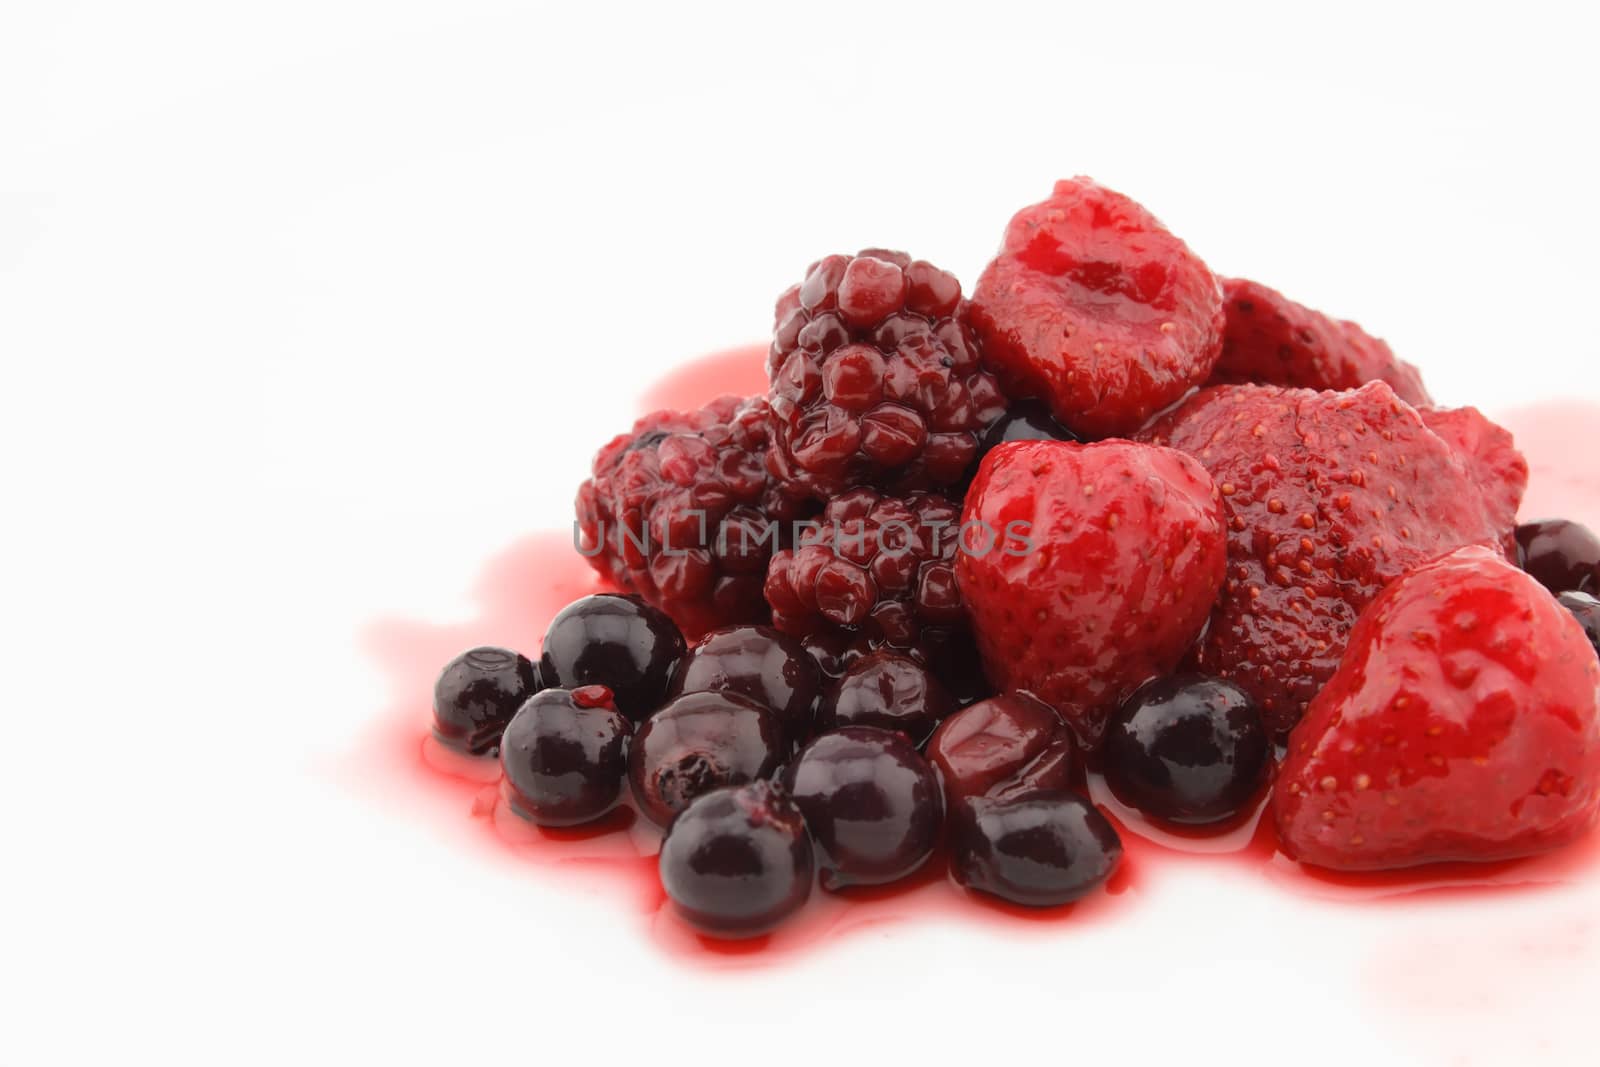 Strawberries, blueberries and raspberries with syrup  isolated on White Background